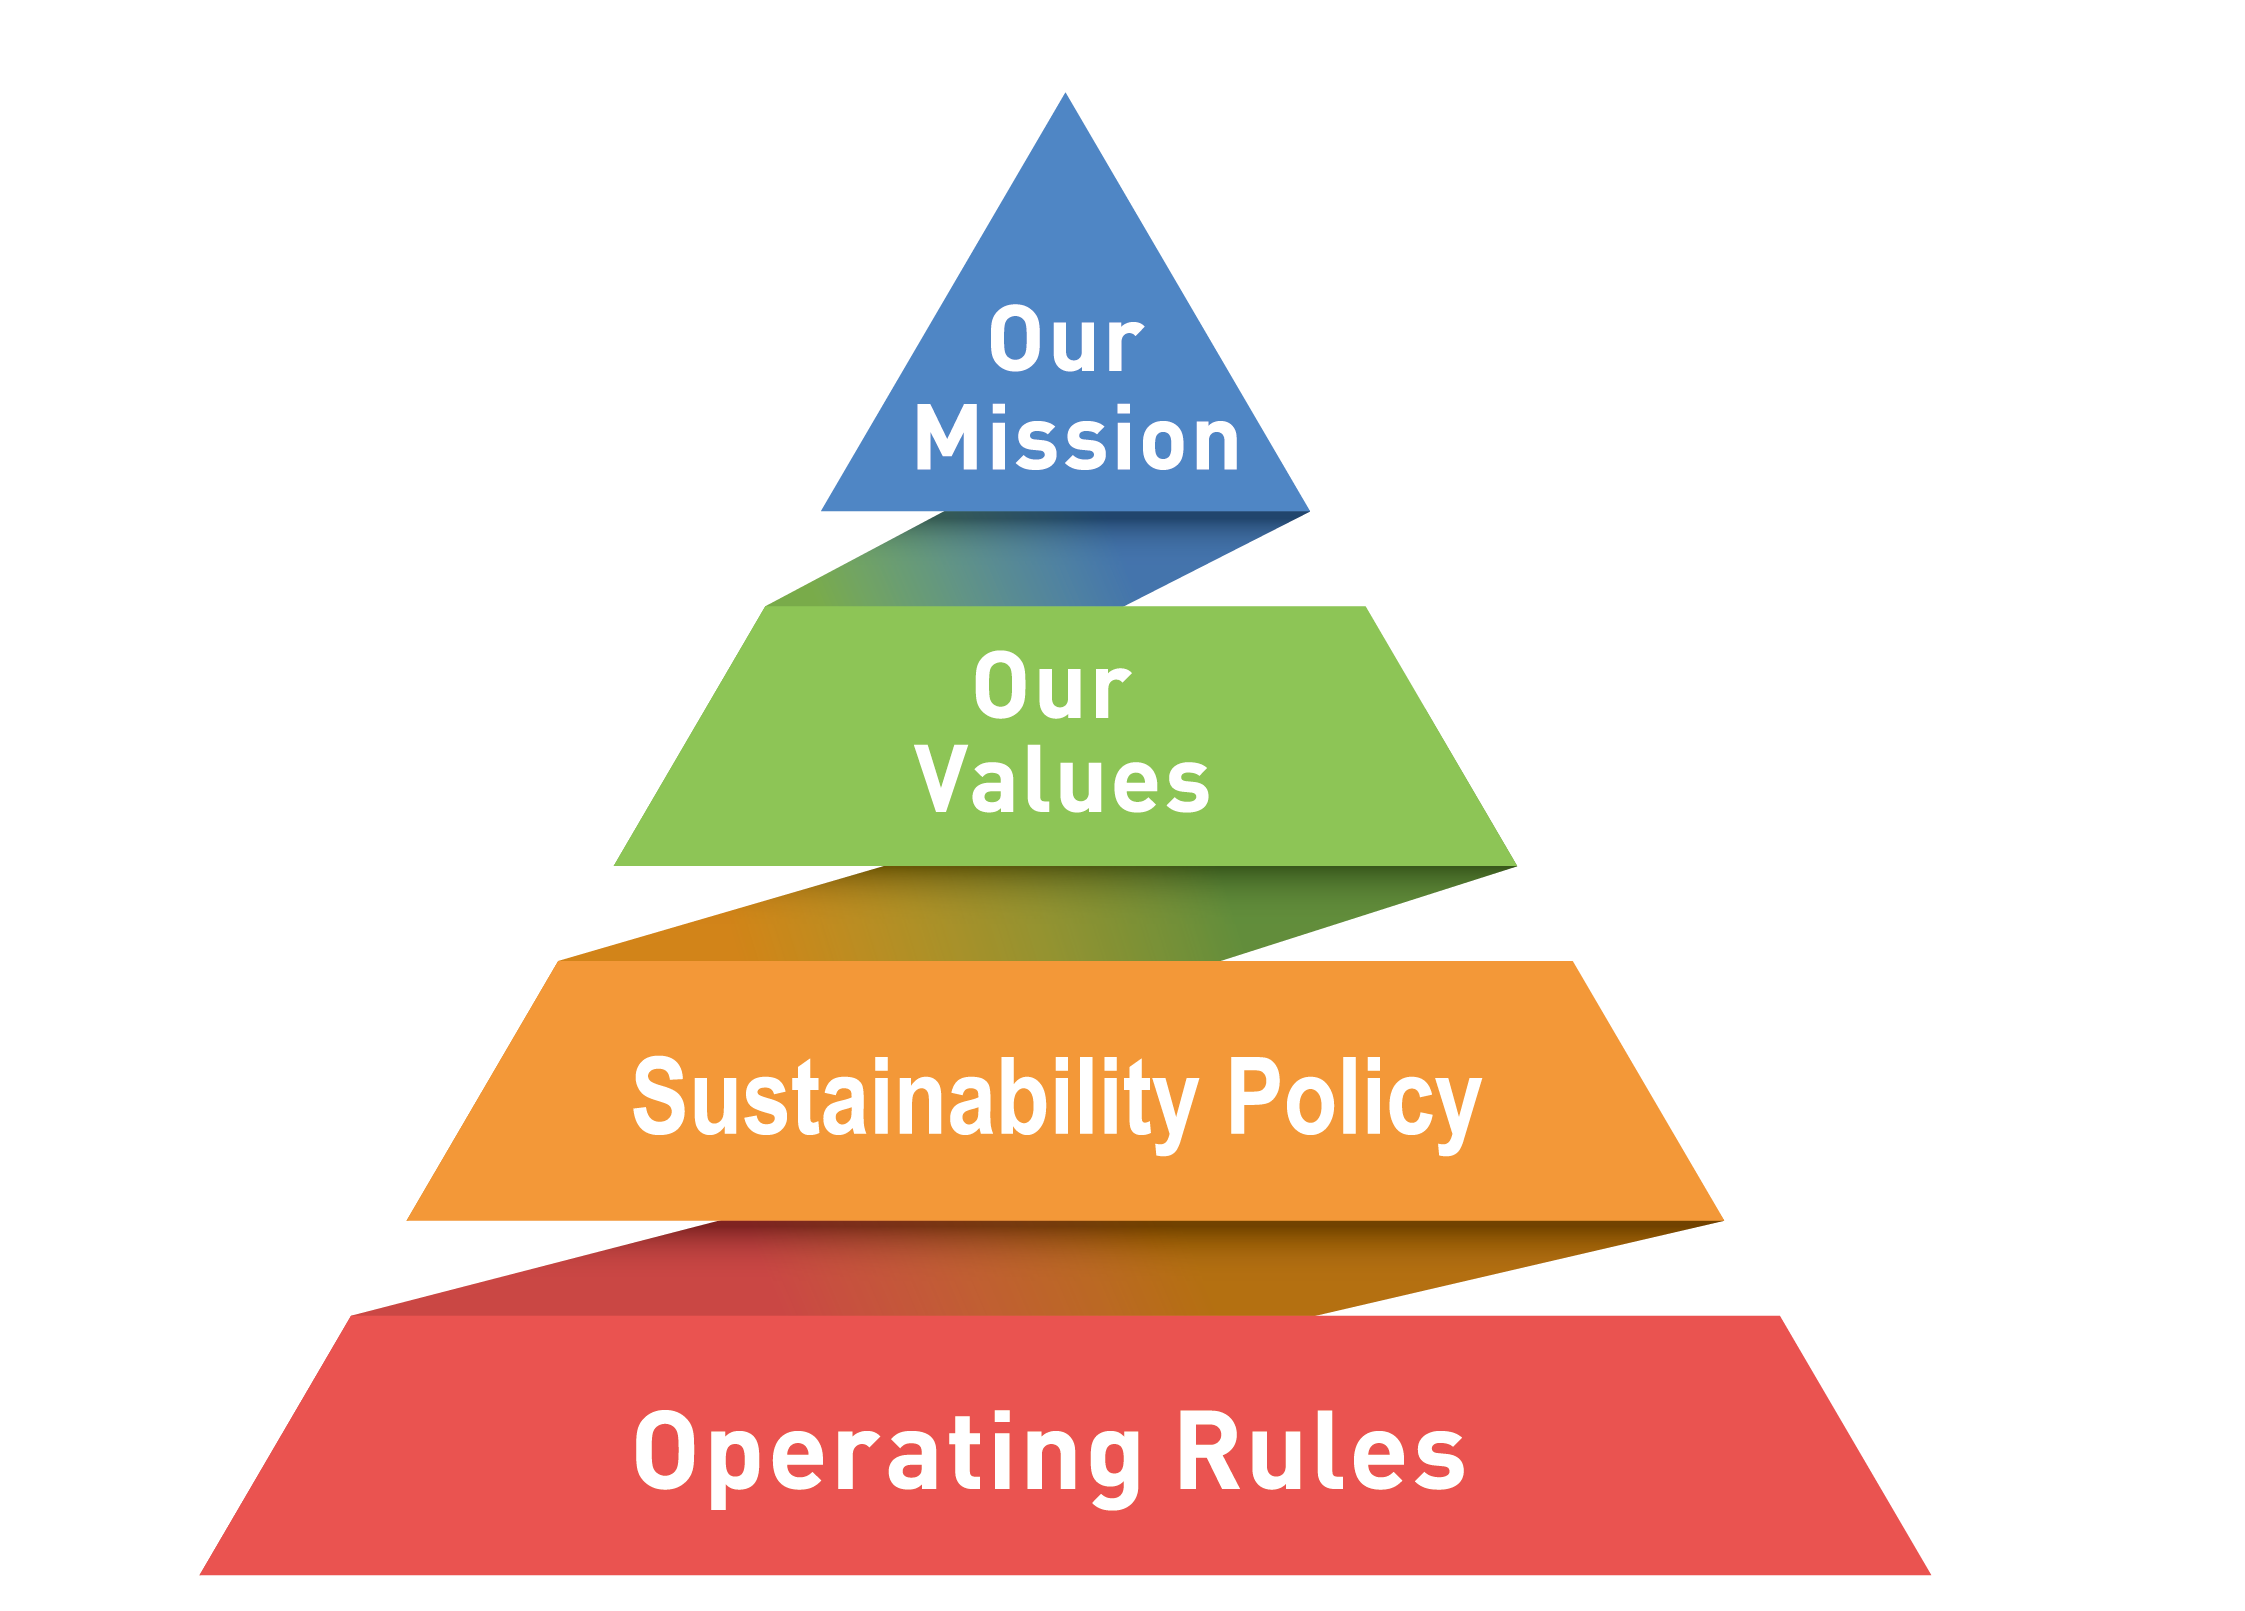 Our Mission and Our Values with Sustainability Policy